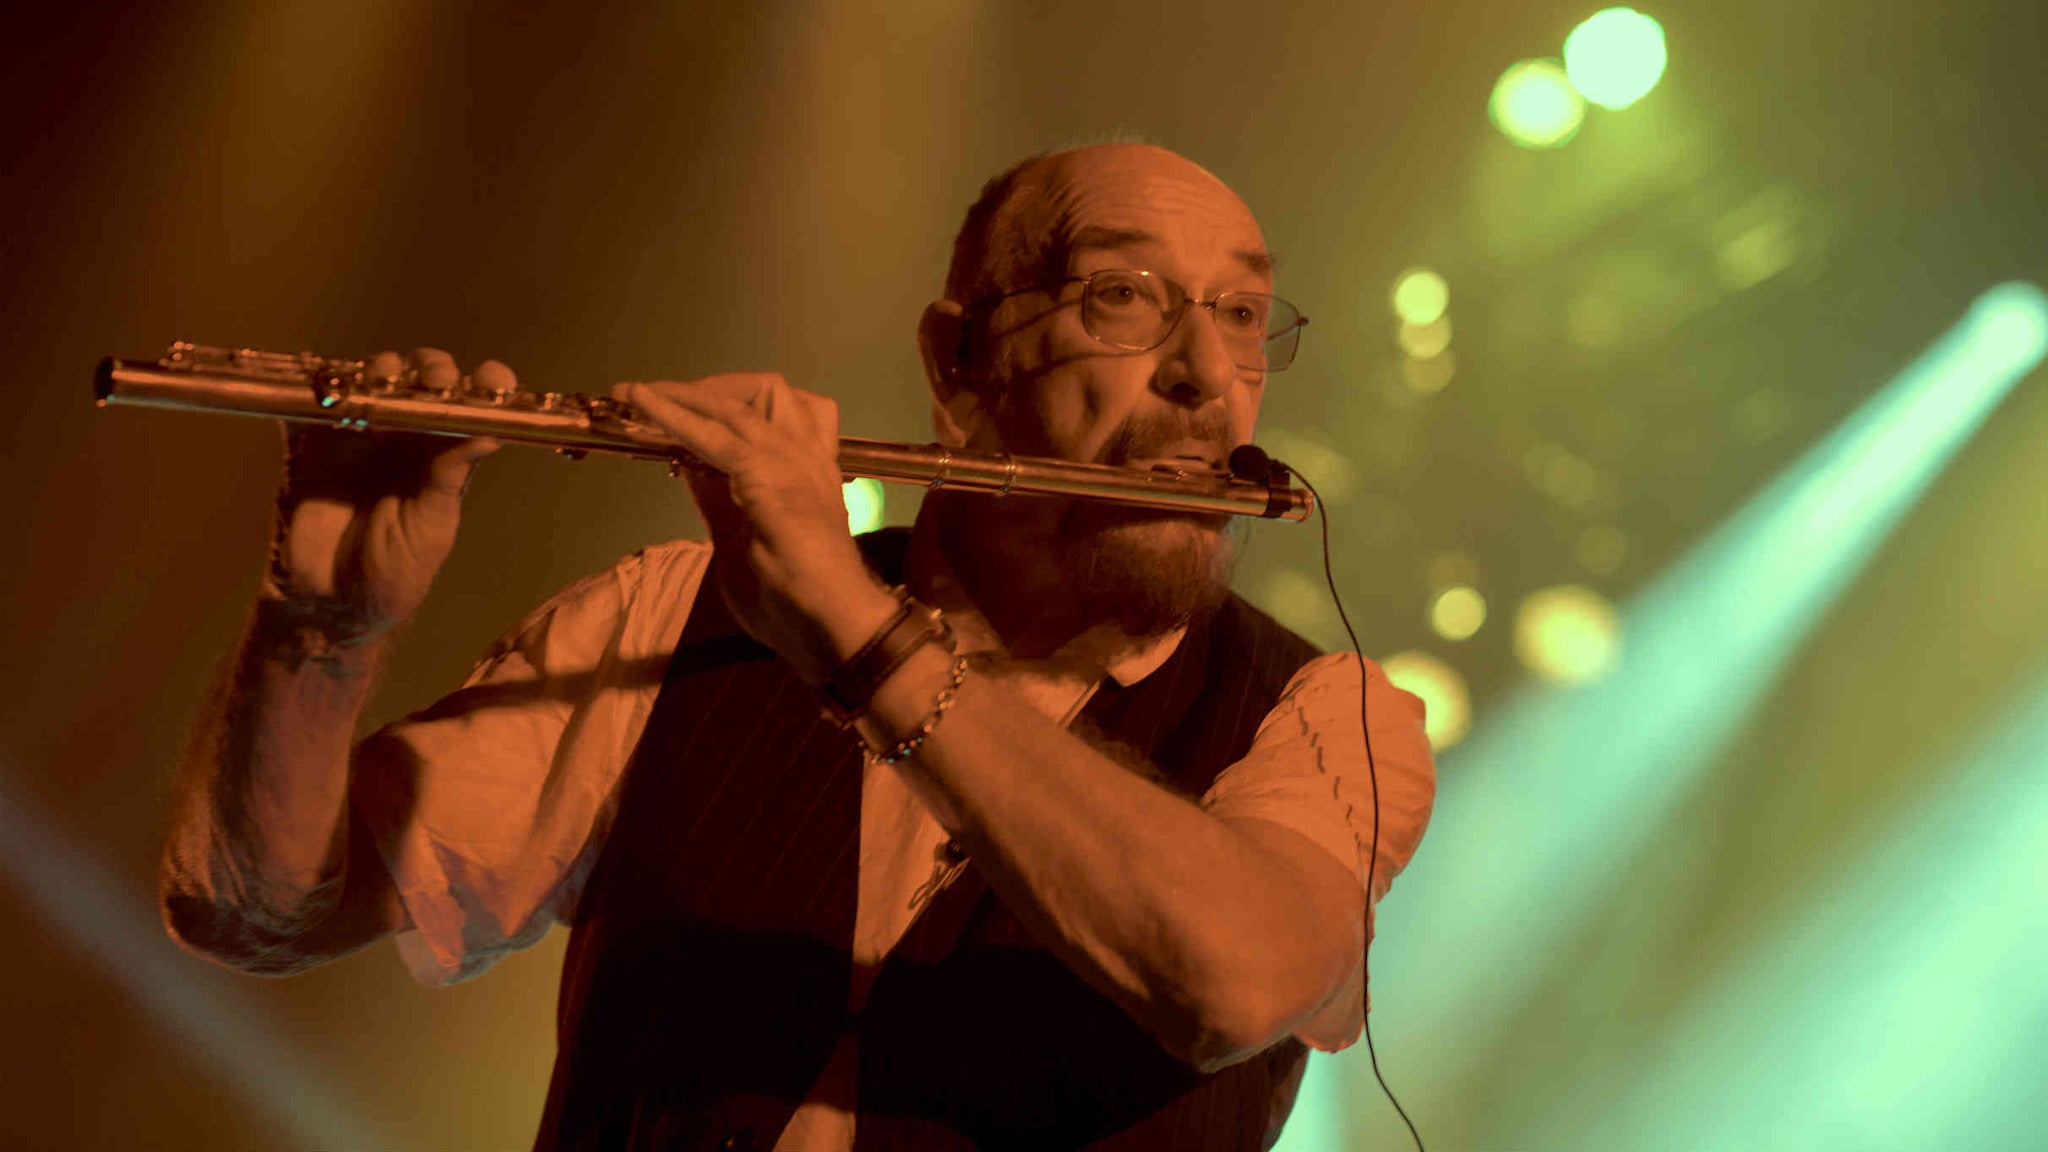 Jethro Tull tour 2023: Get tickets, dates and prices